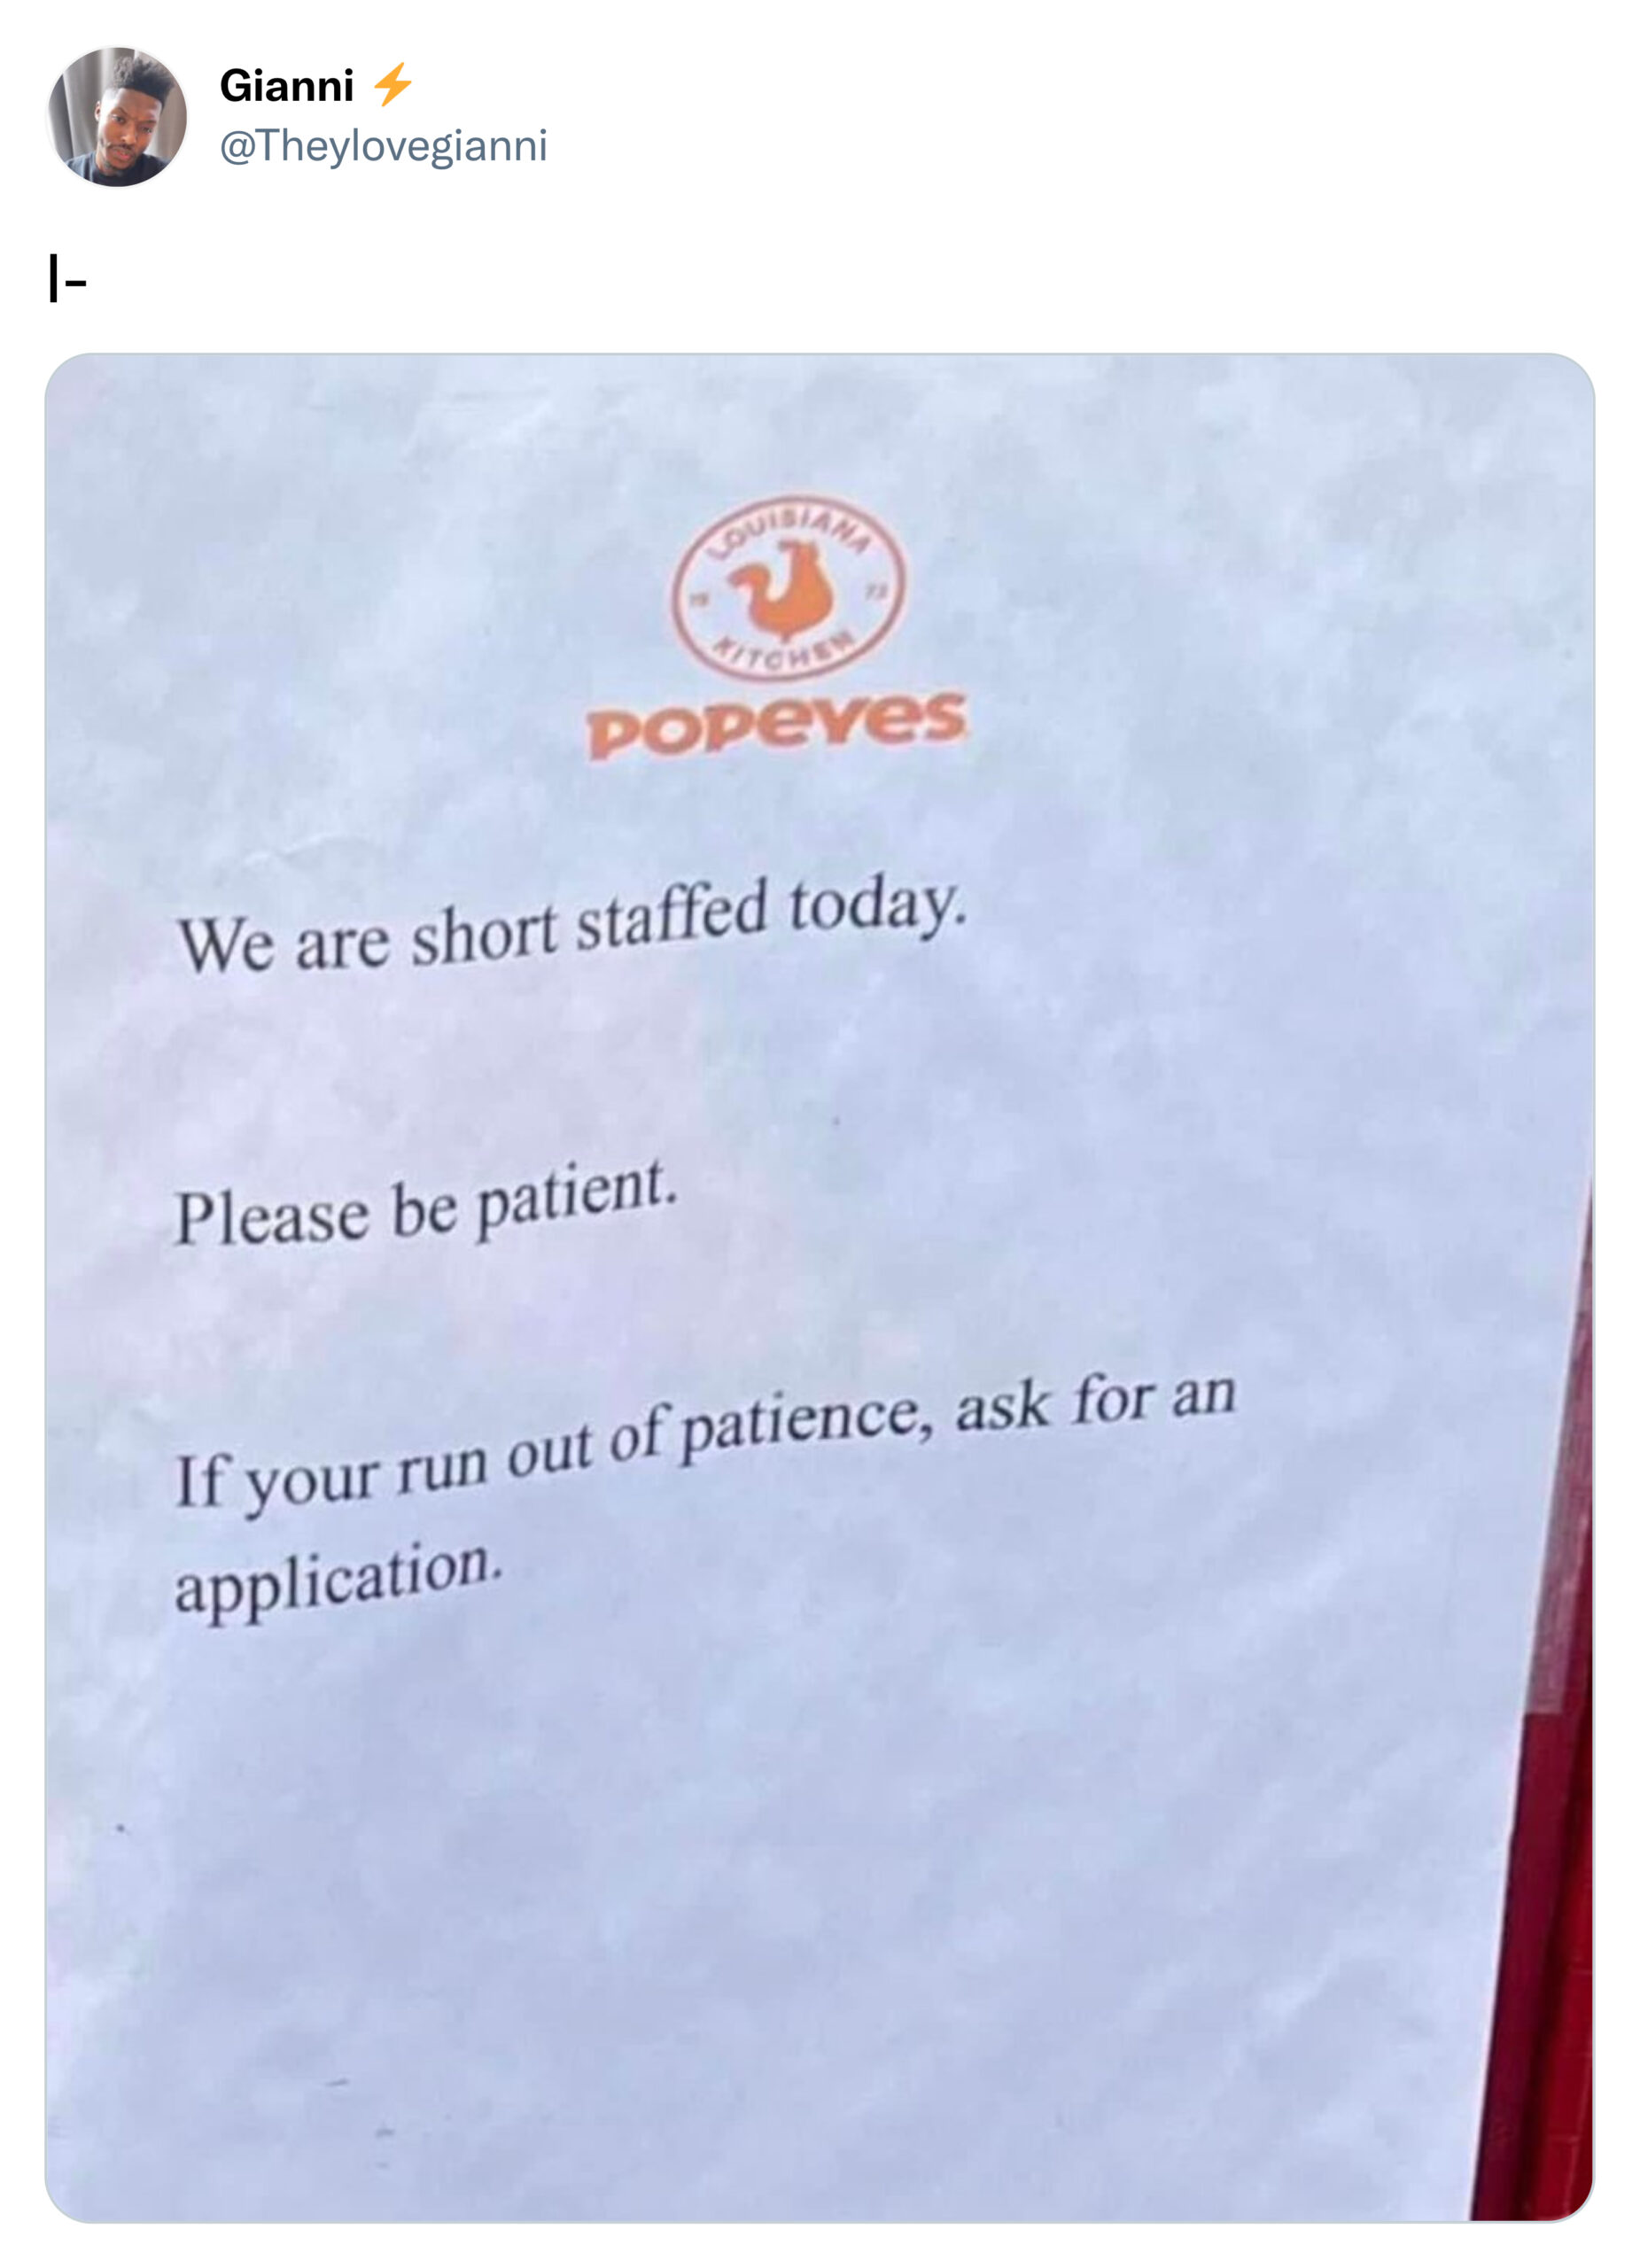 funny tweets  -  sky - | Gianni Louisiana Hitchen Popeyes We are short staffed today. Please be patient. If your run out of patience, ask for an application.